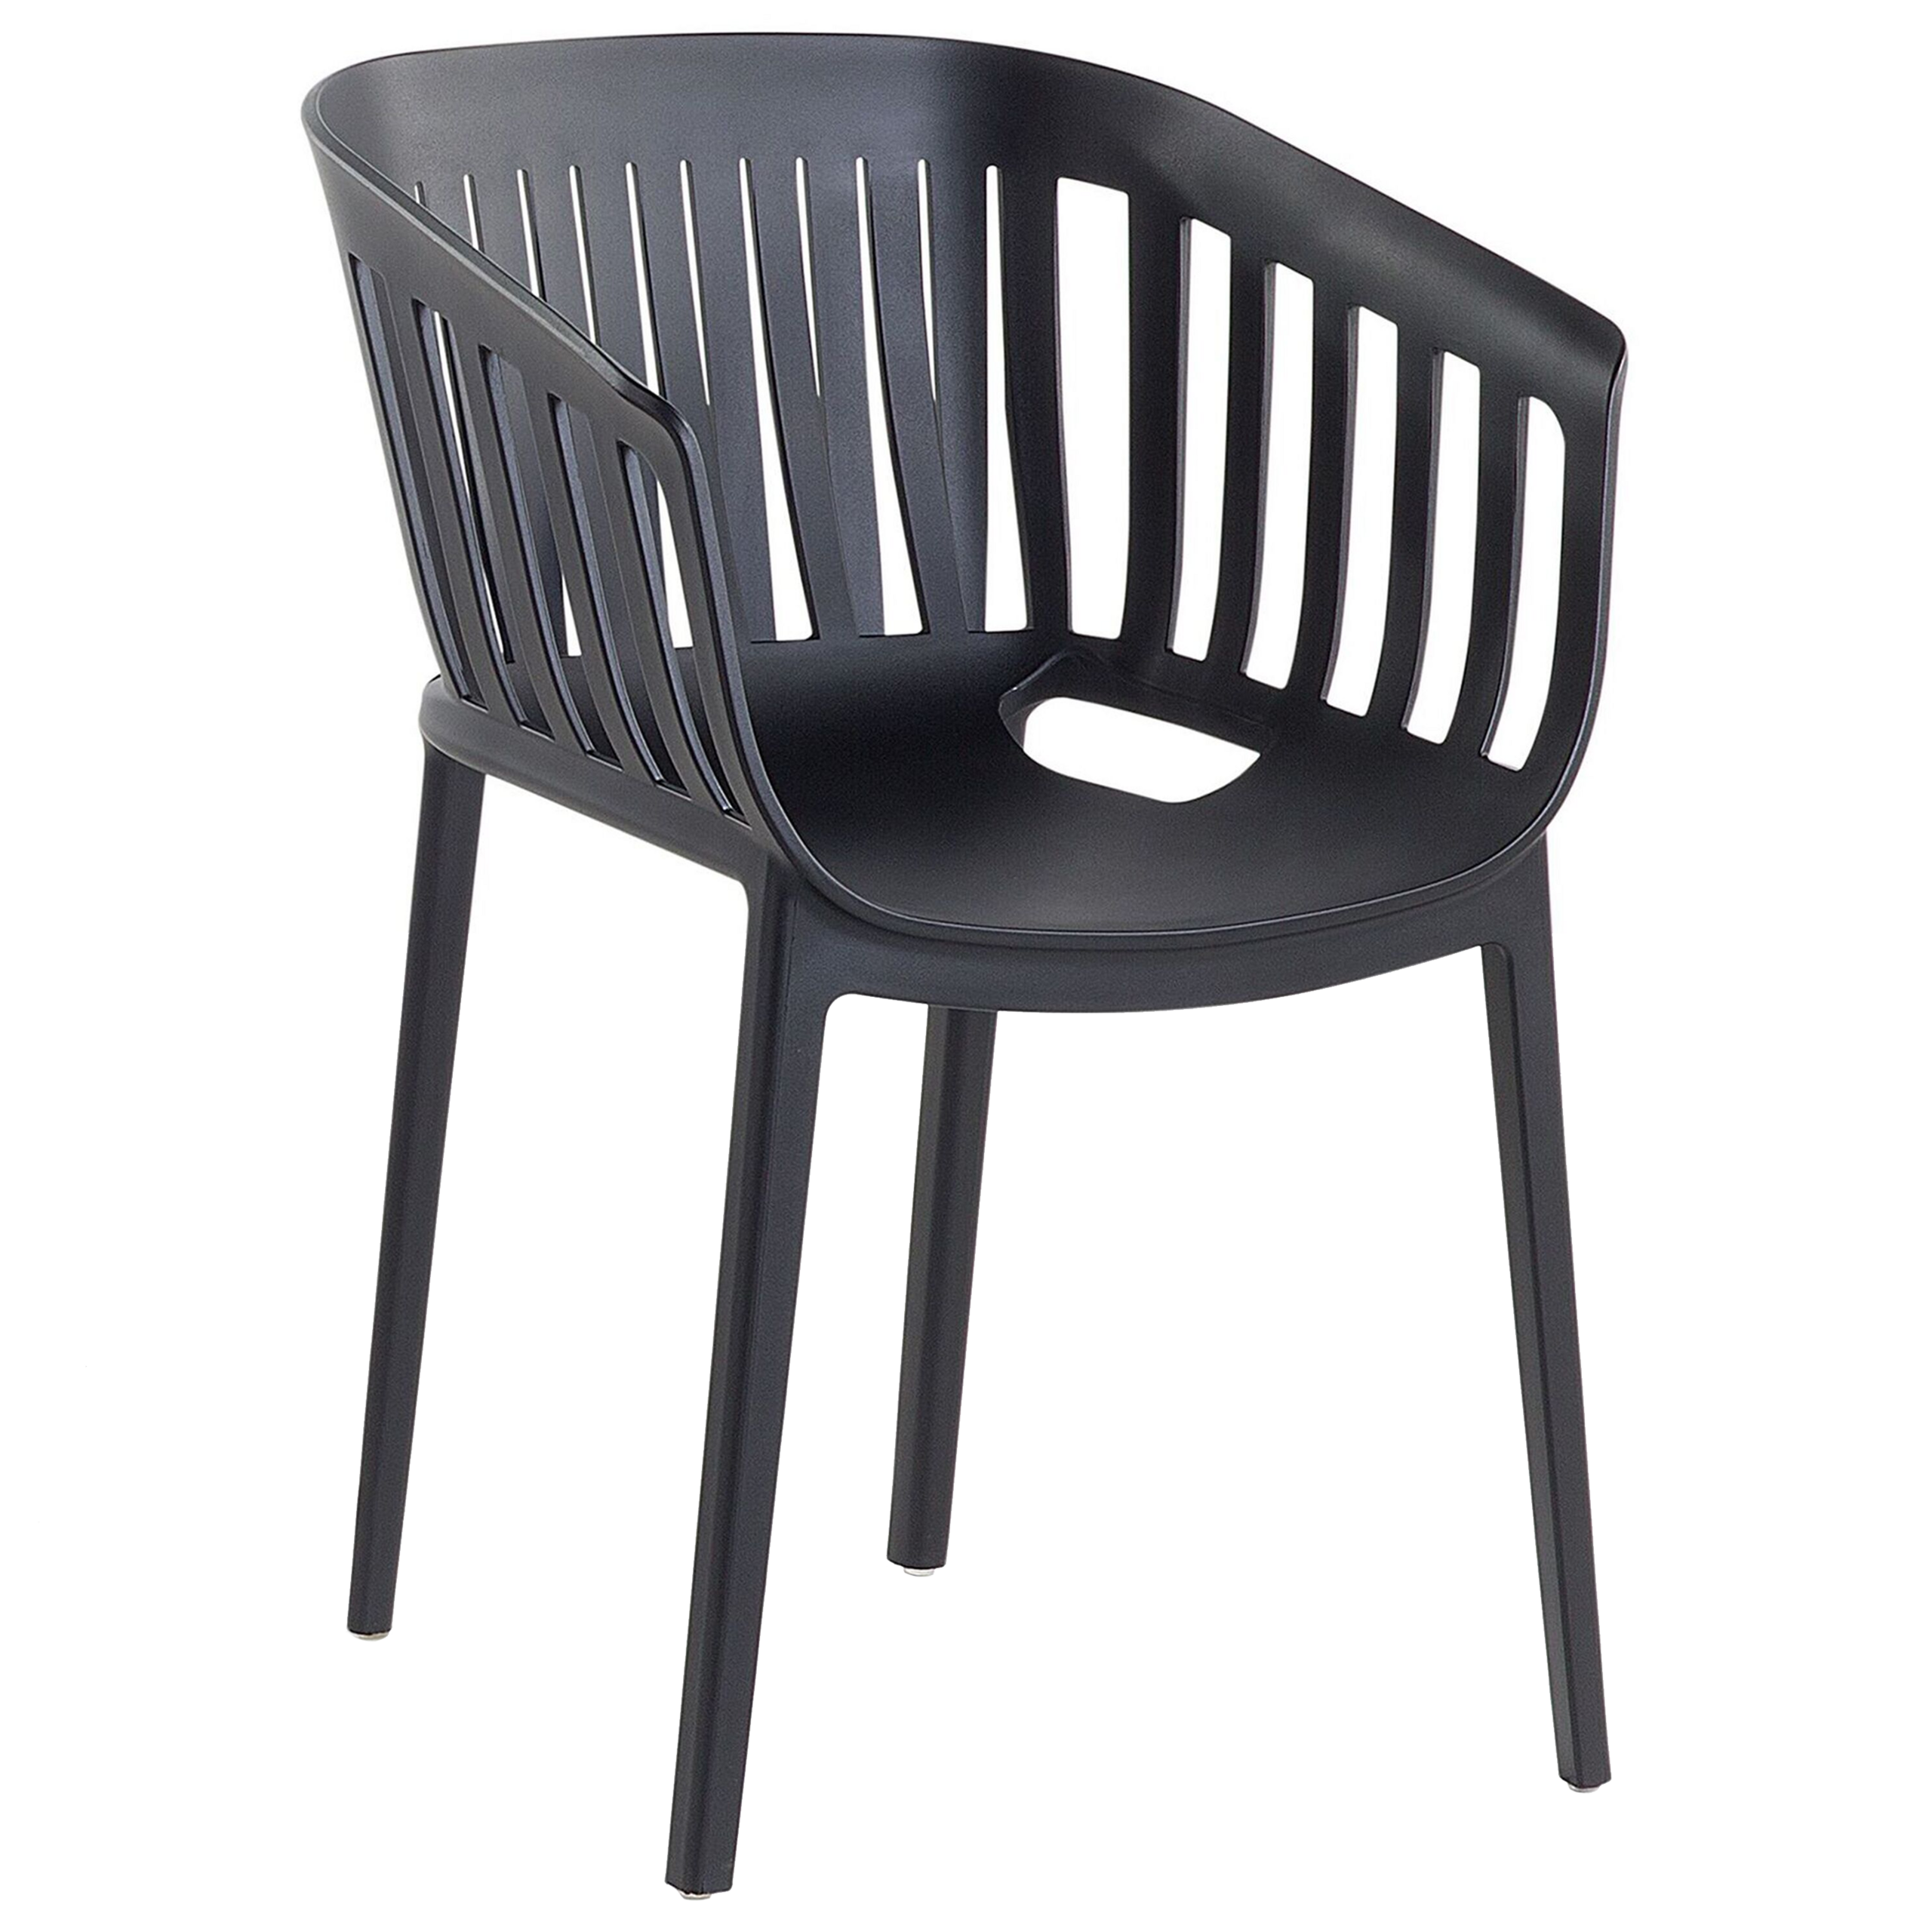 Beliani Dining Chair Black Indoor Outdoor Stackable Curved Slatted Back